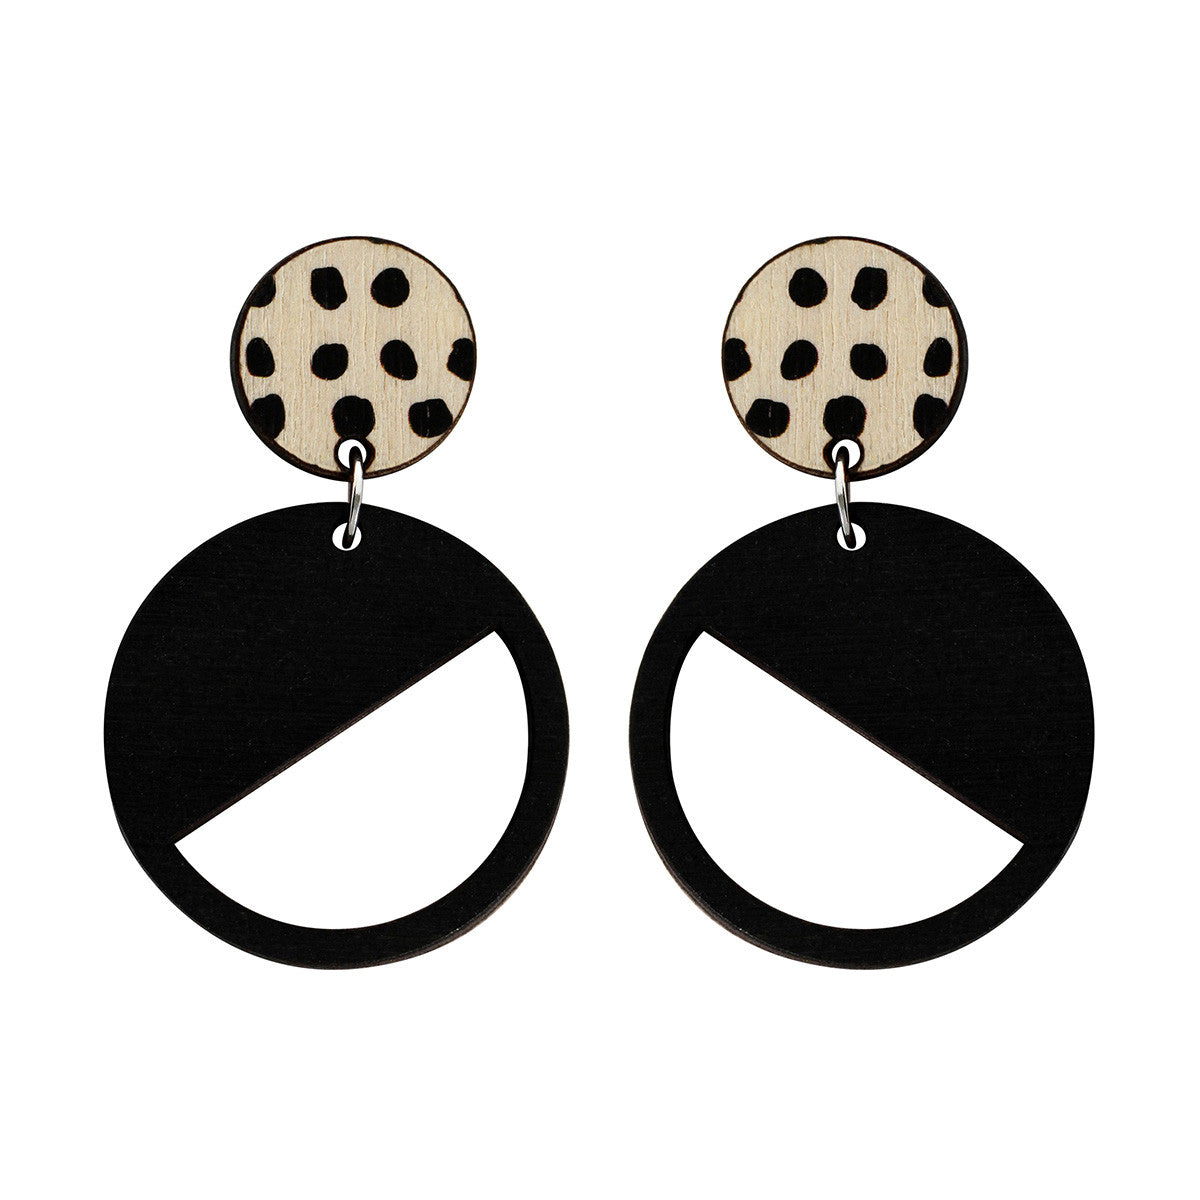 2 tiered earrings with spots in black